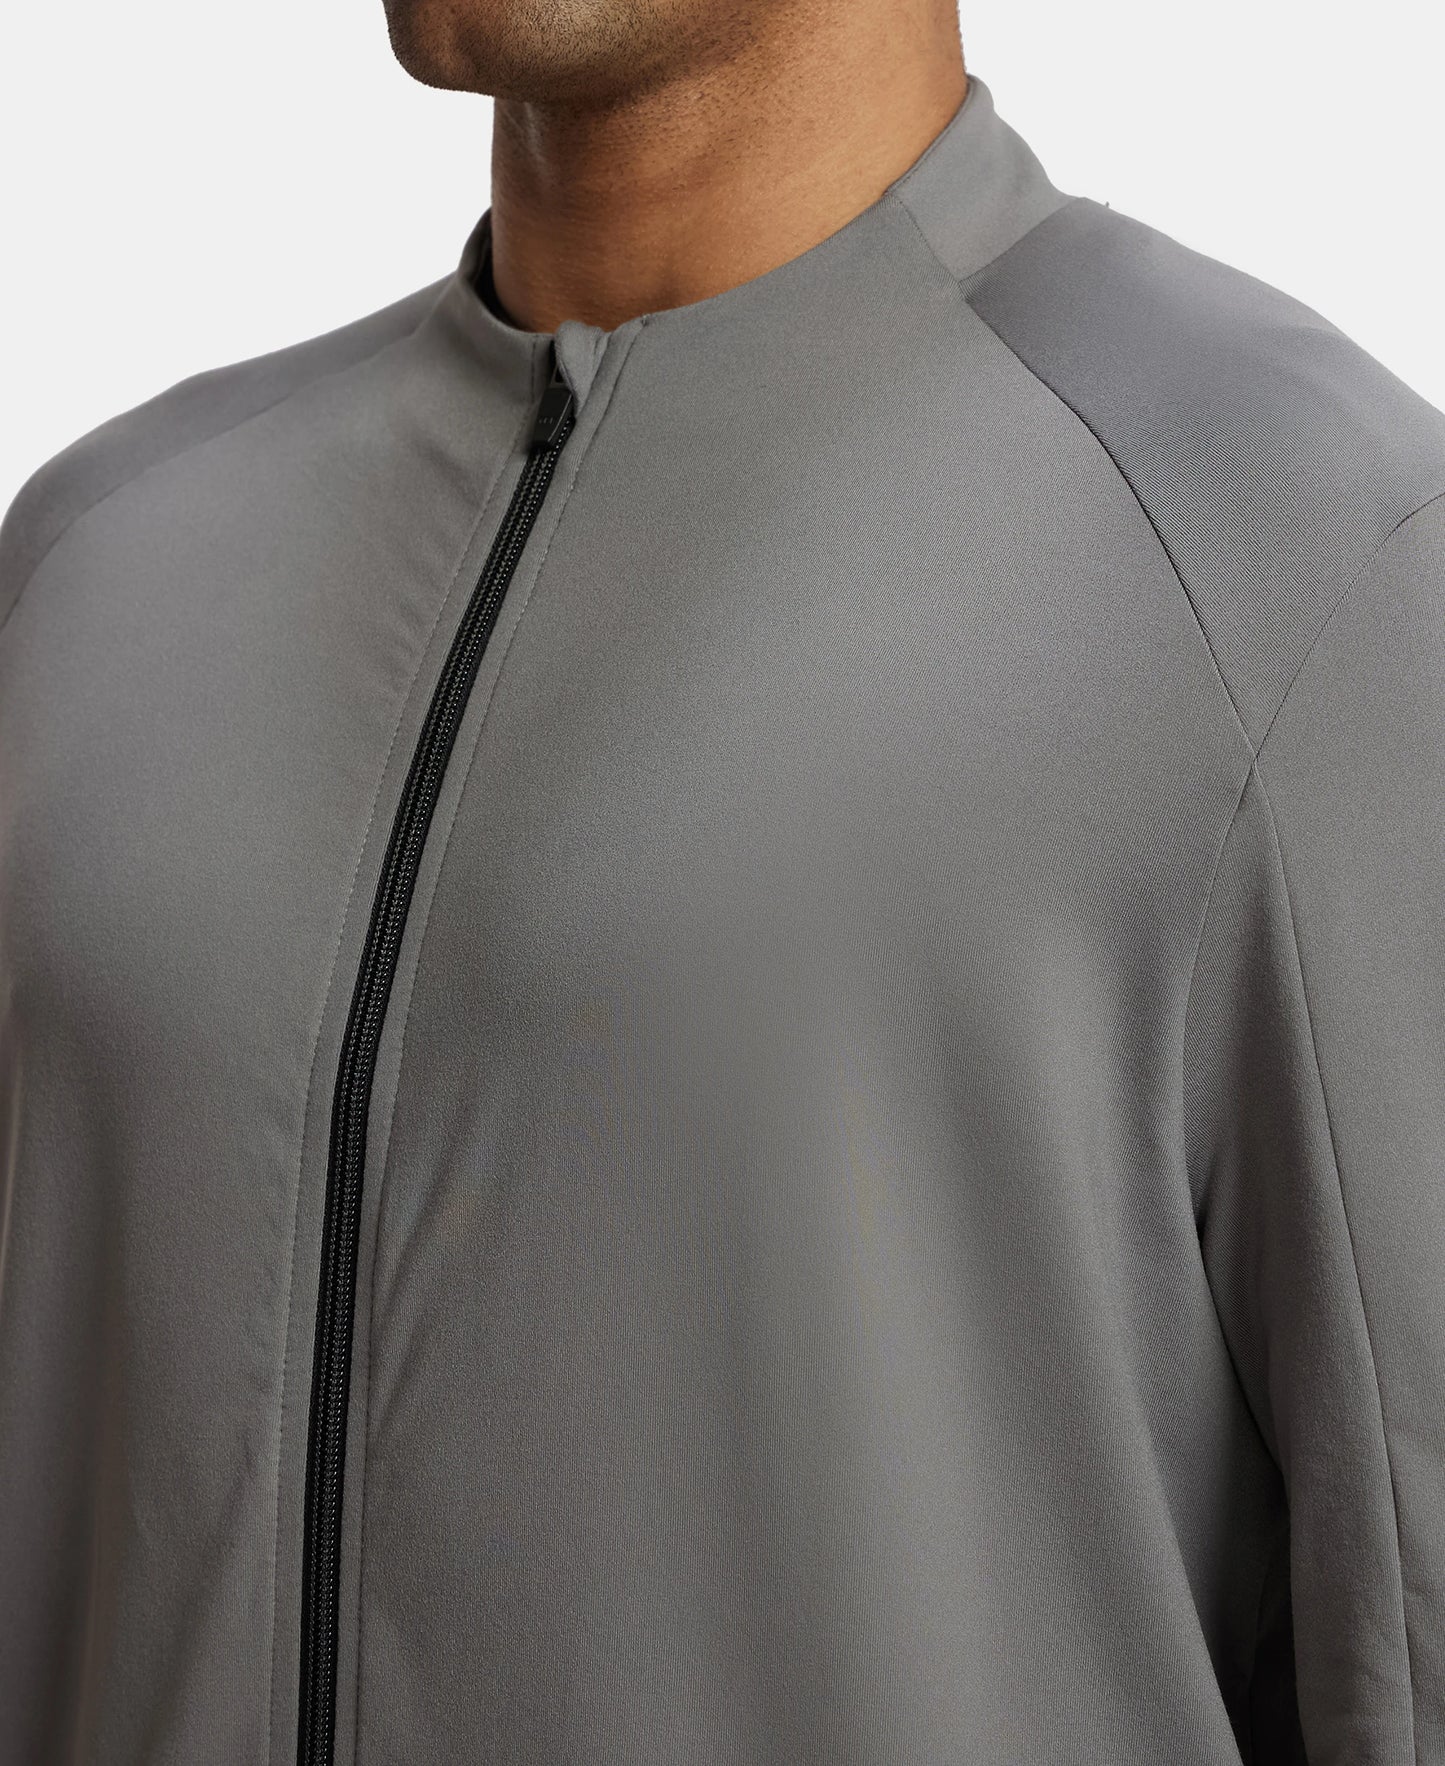 Soft Touch Microfiber Elastane Stretch Jacket with Thumbhole Styling - Quiet Shade-7